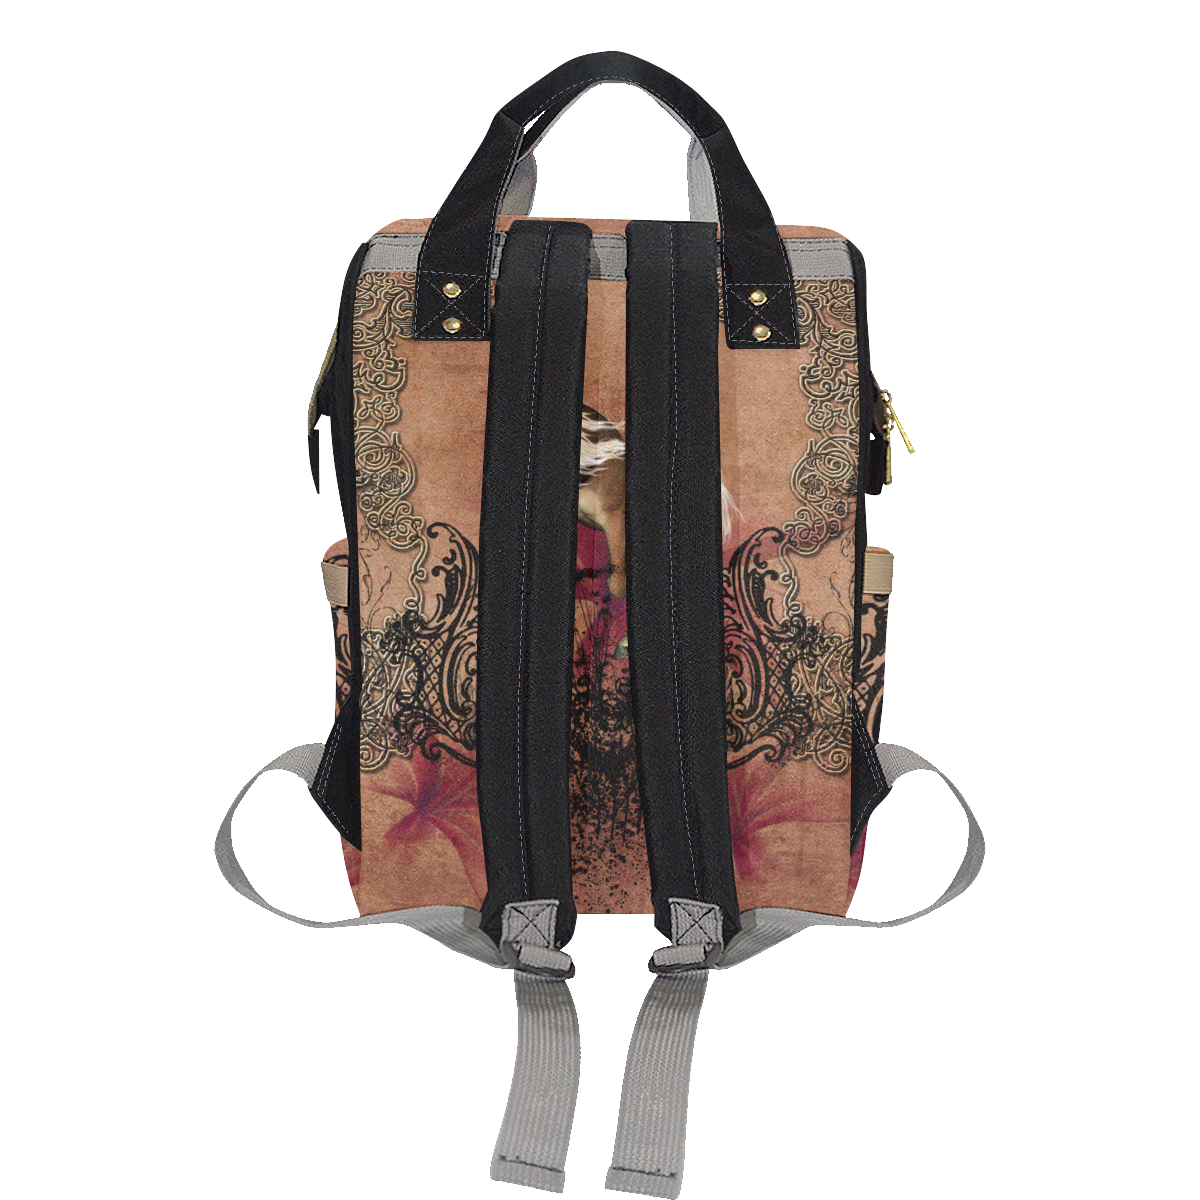 Amazing horse with flowers Multi-Function Diaper Backpack/Diaper Bag (Model 1688)